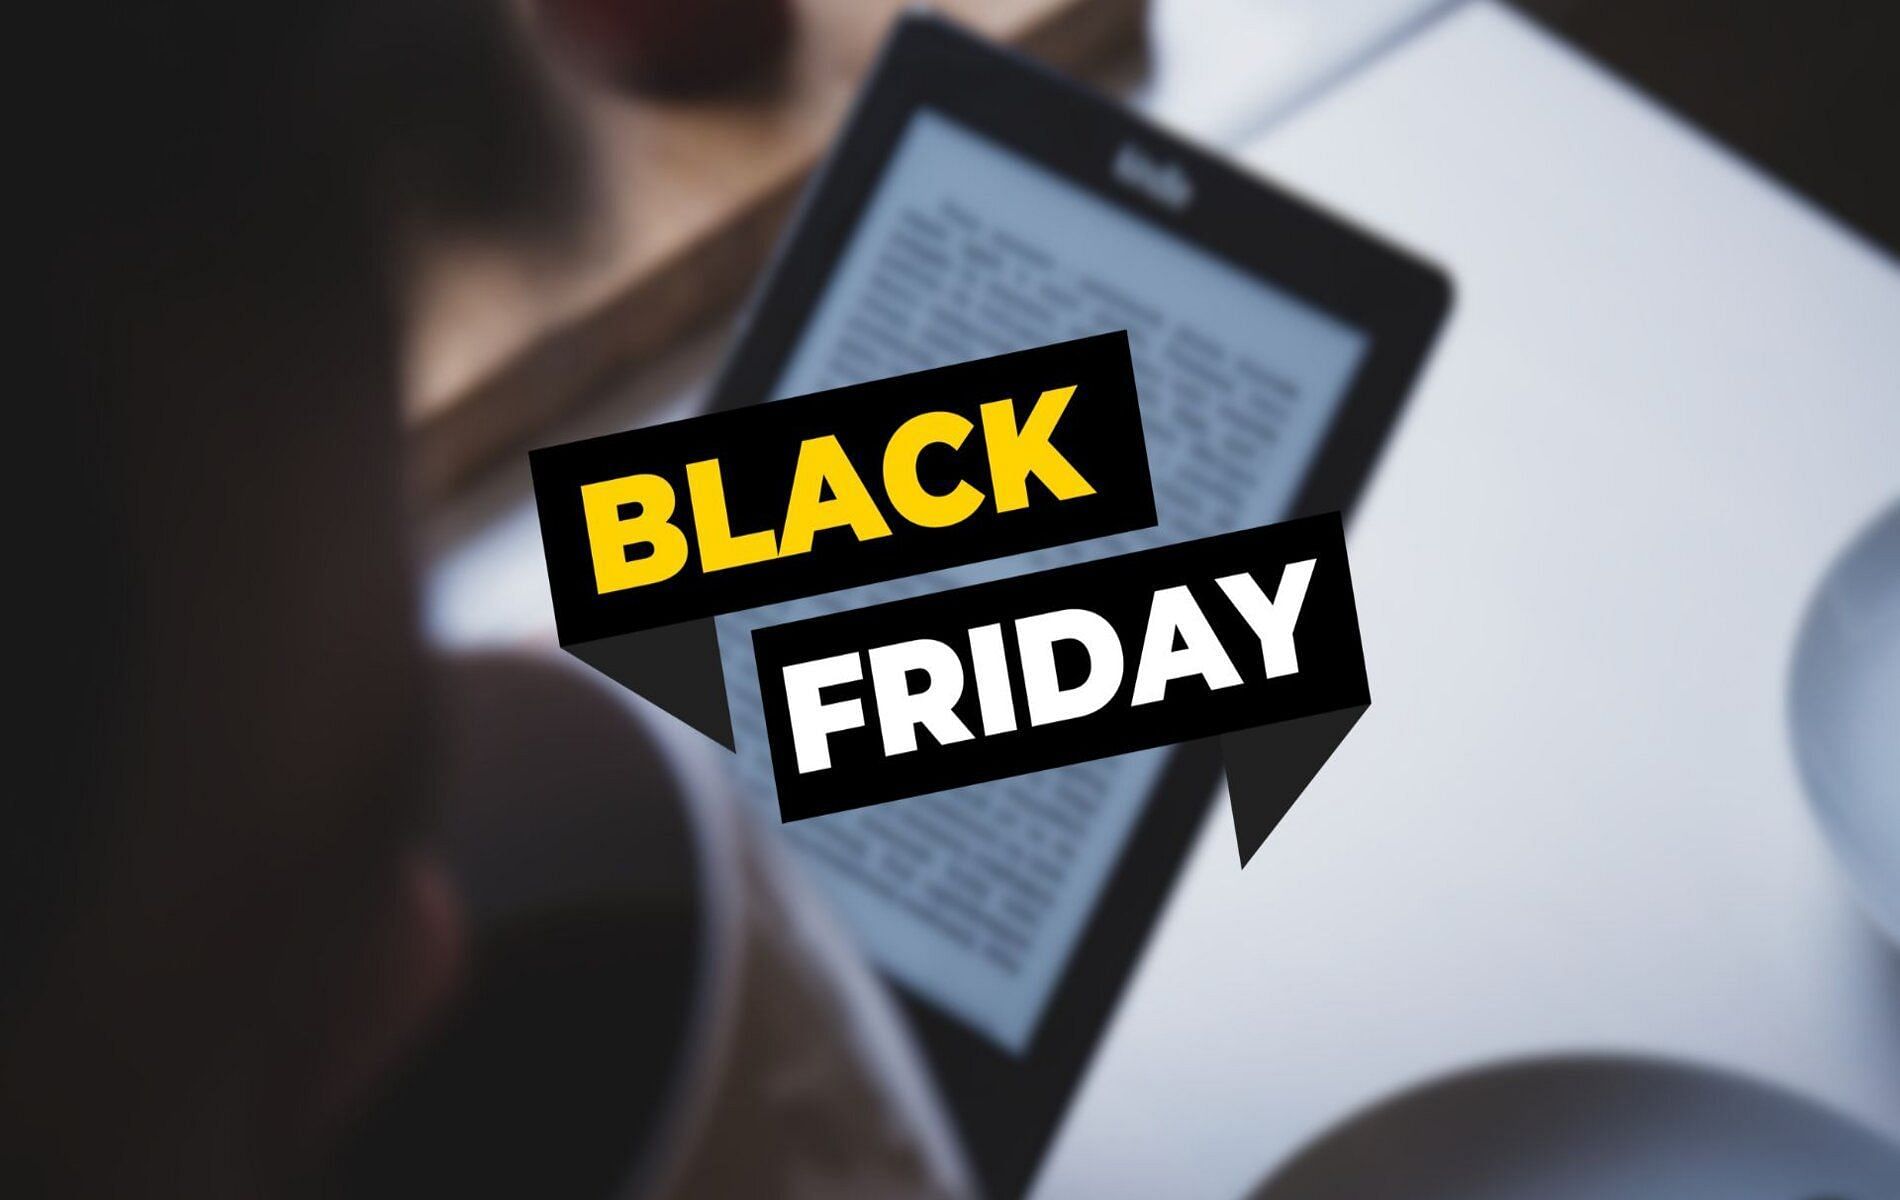 Get 3 Months of Kindle Unlimited for $1 Black Friday Deal